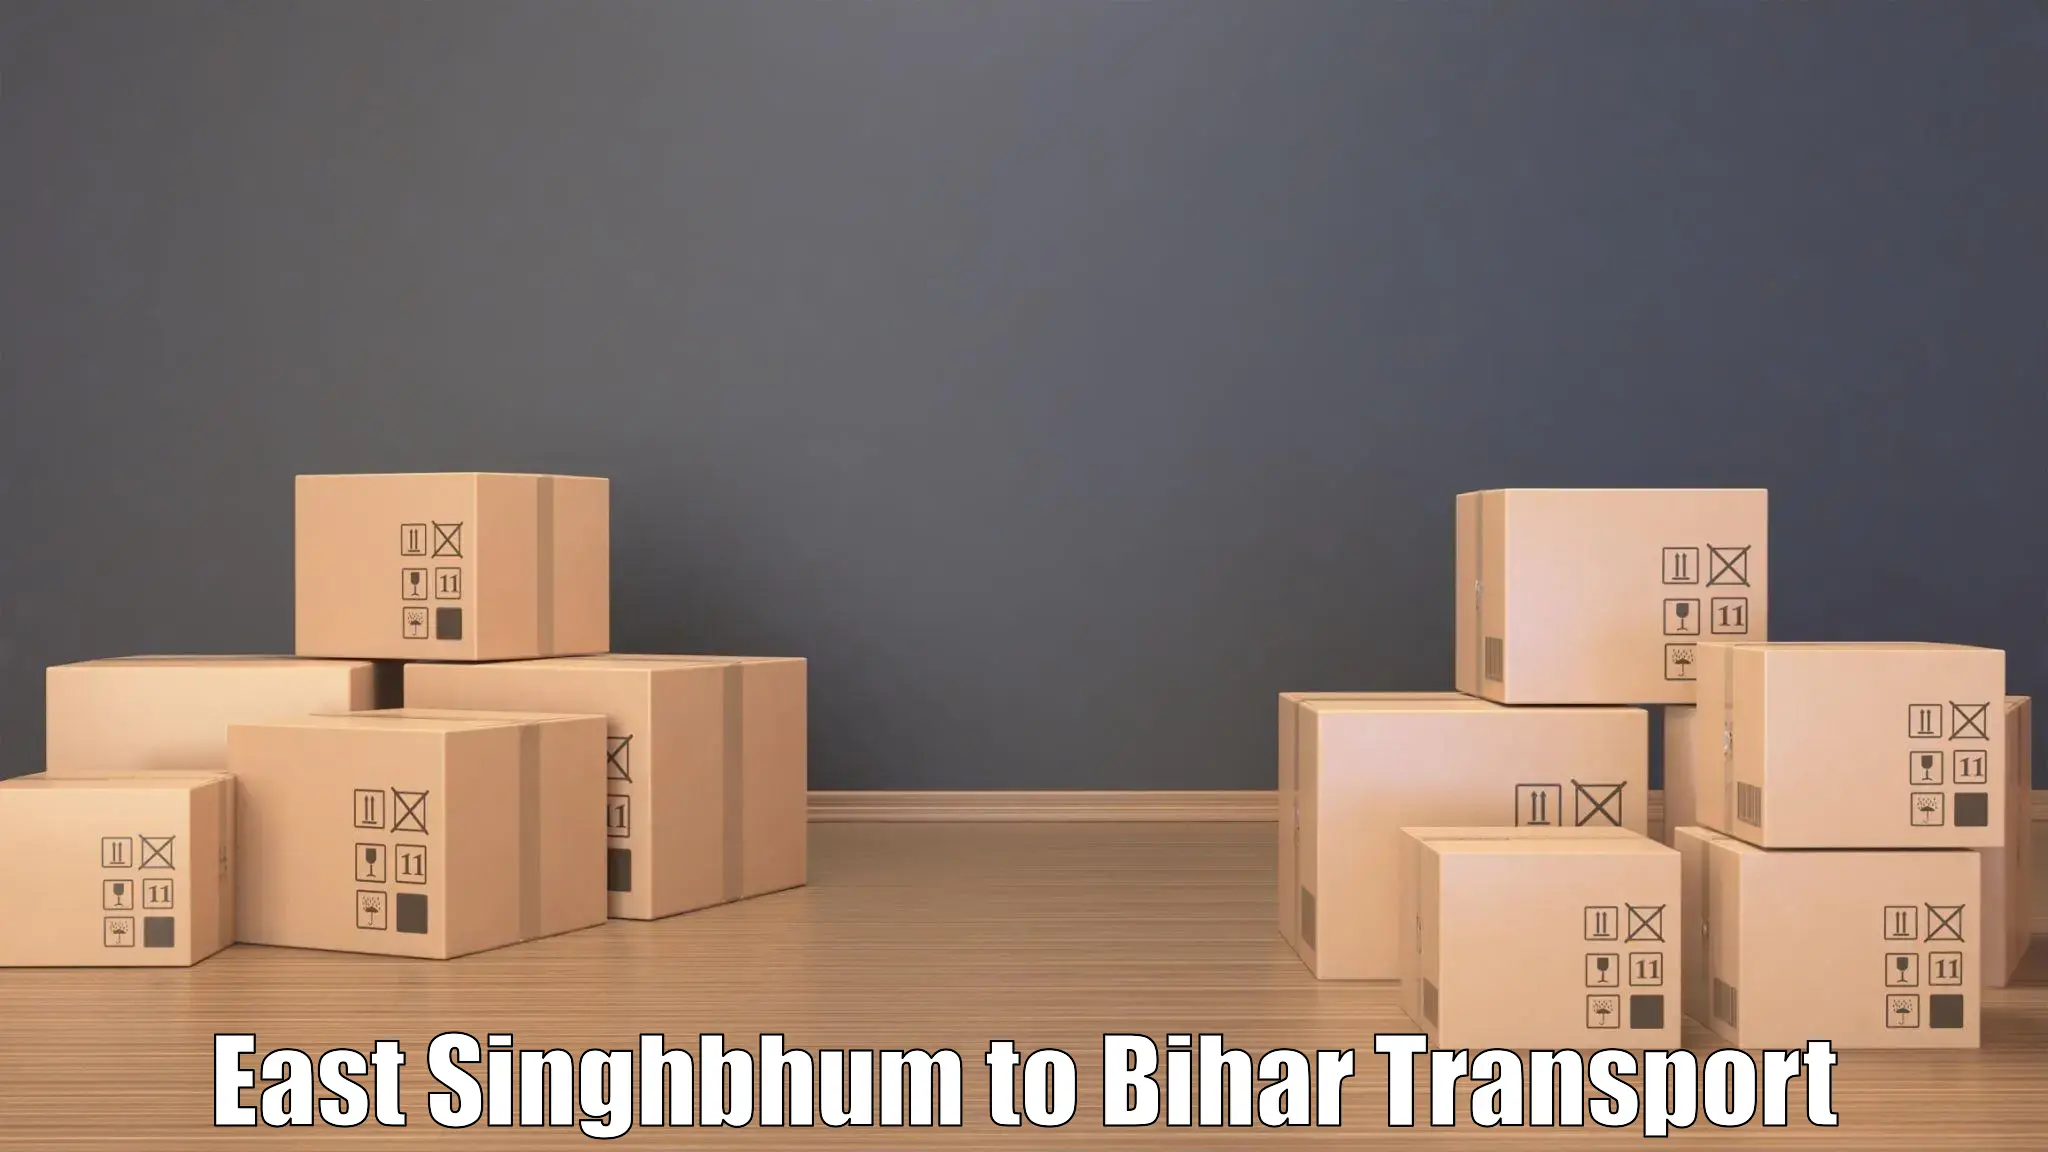 Transport shared services in East Singhbhum to Mairwa